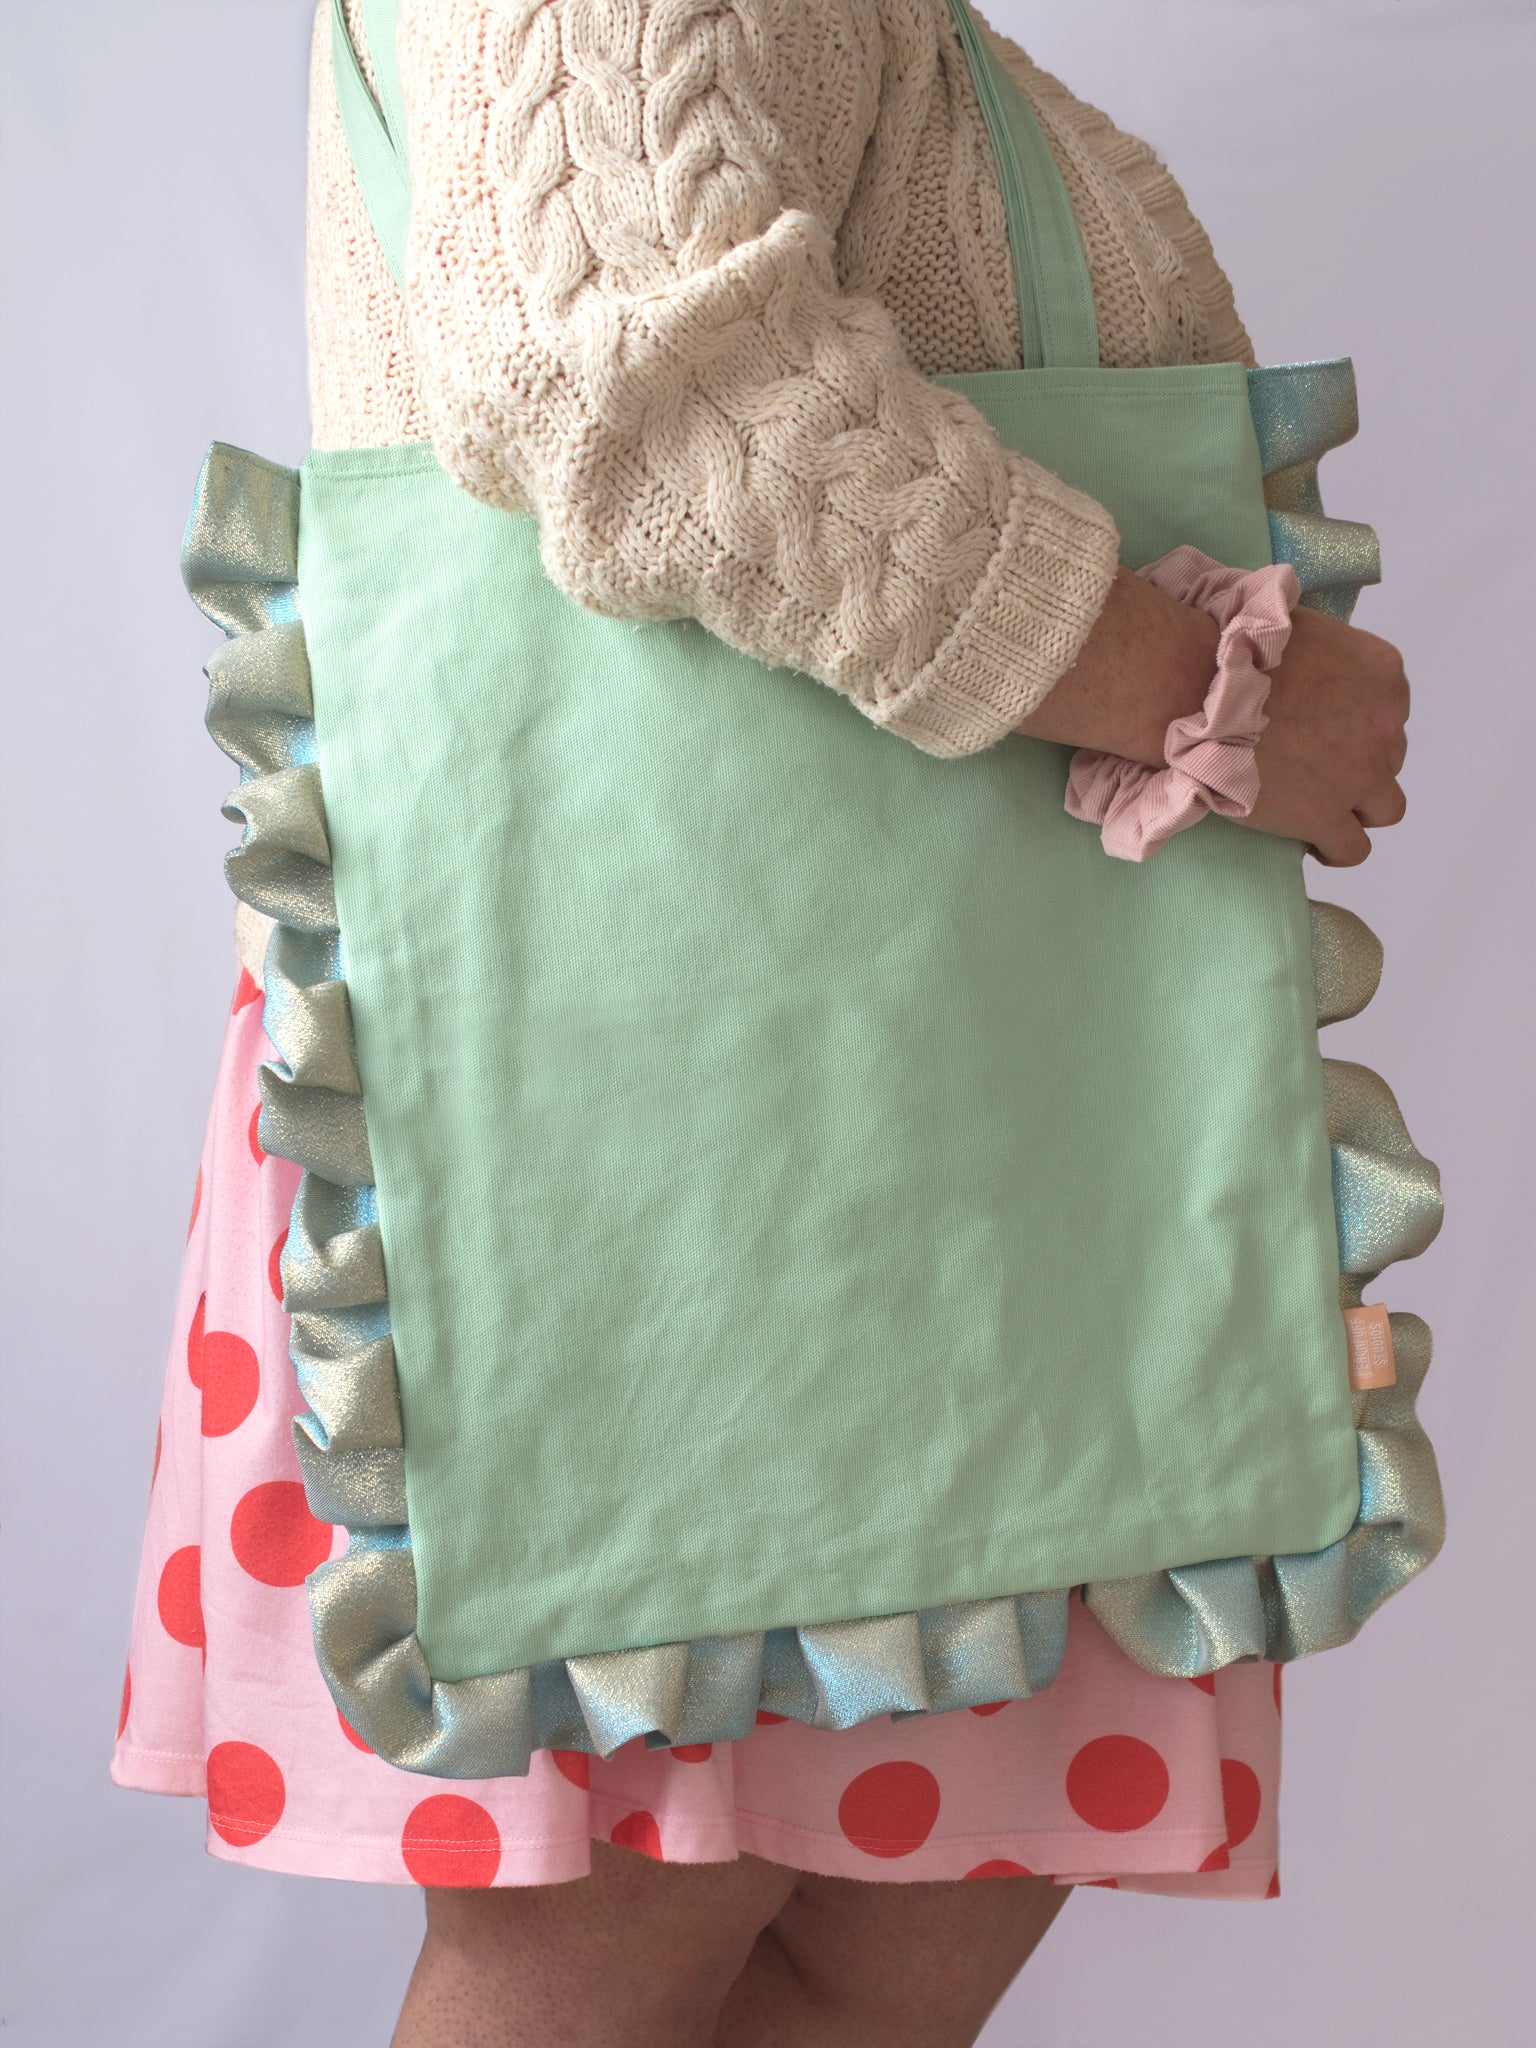 A mint green ruffle tote bag is worn on the shoulder of a female who is wearing a pink and red polka dot dress and cream knit cardigan.